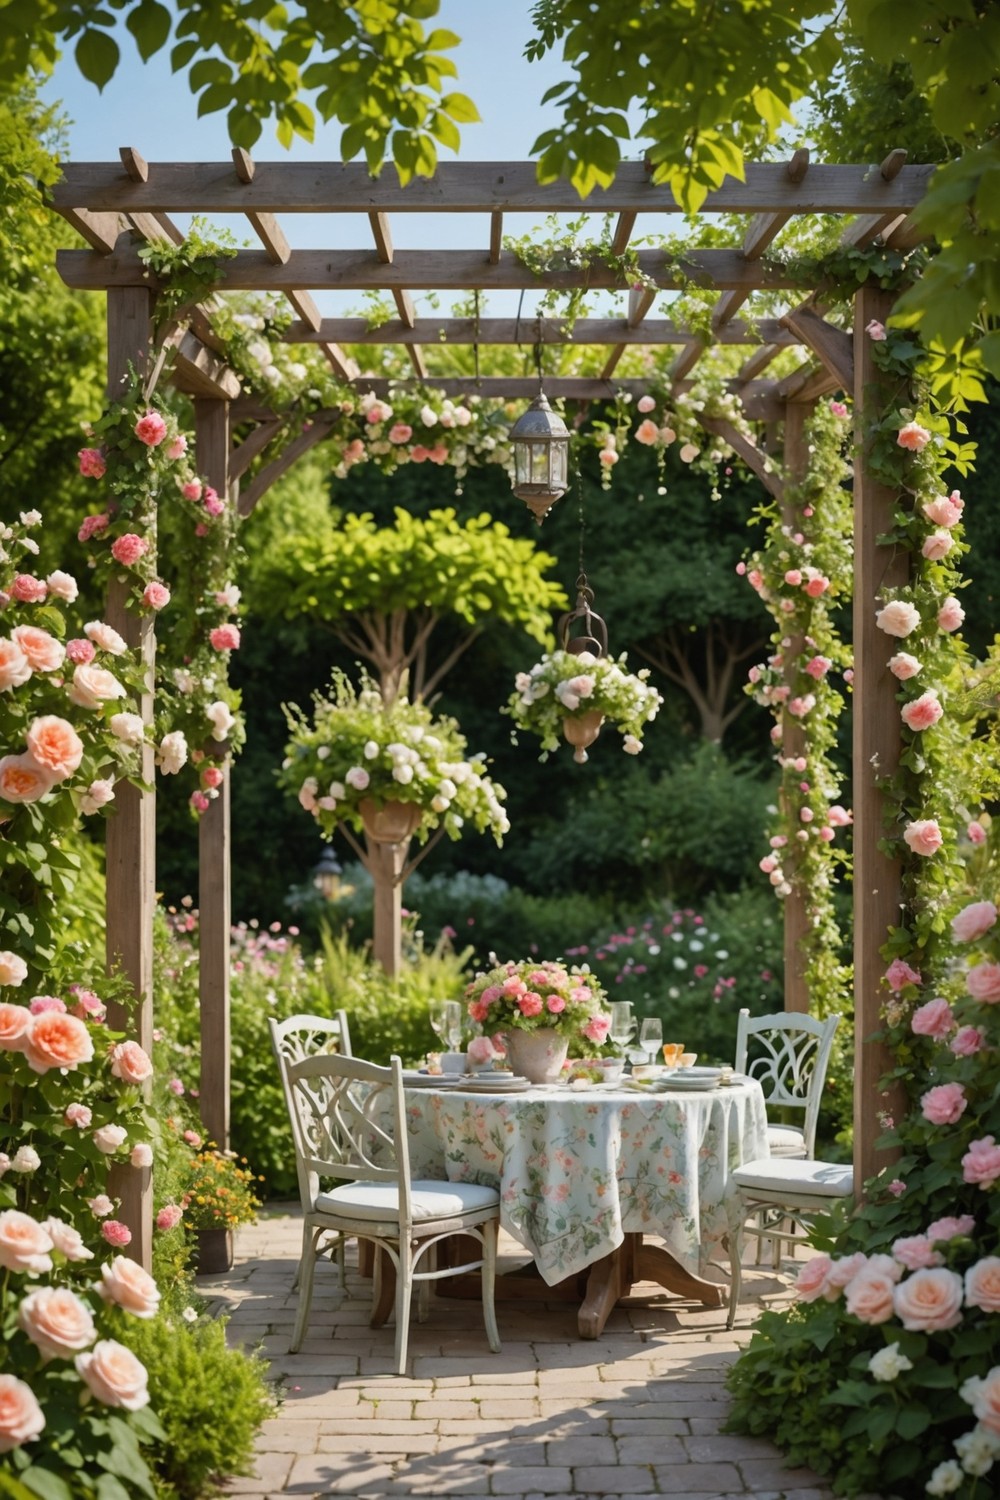 Whimsical Pergola with Floral Patterns and Fabric Shades